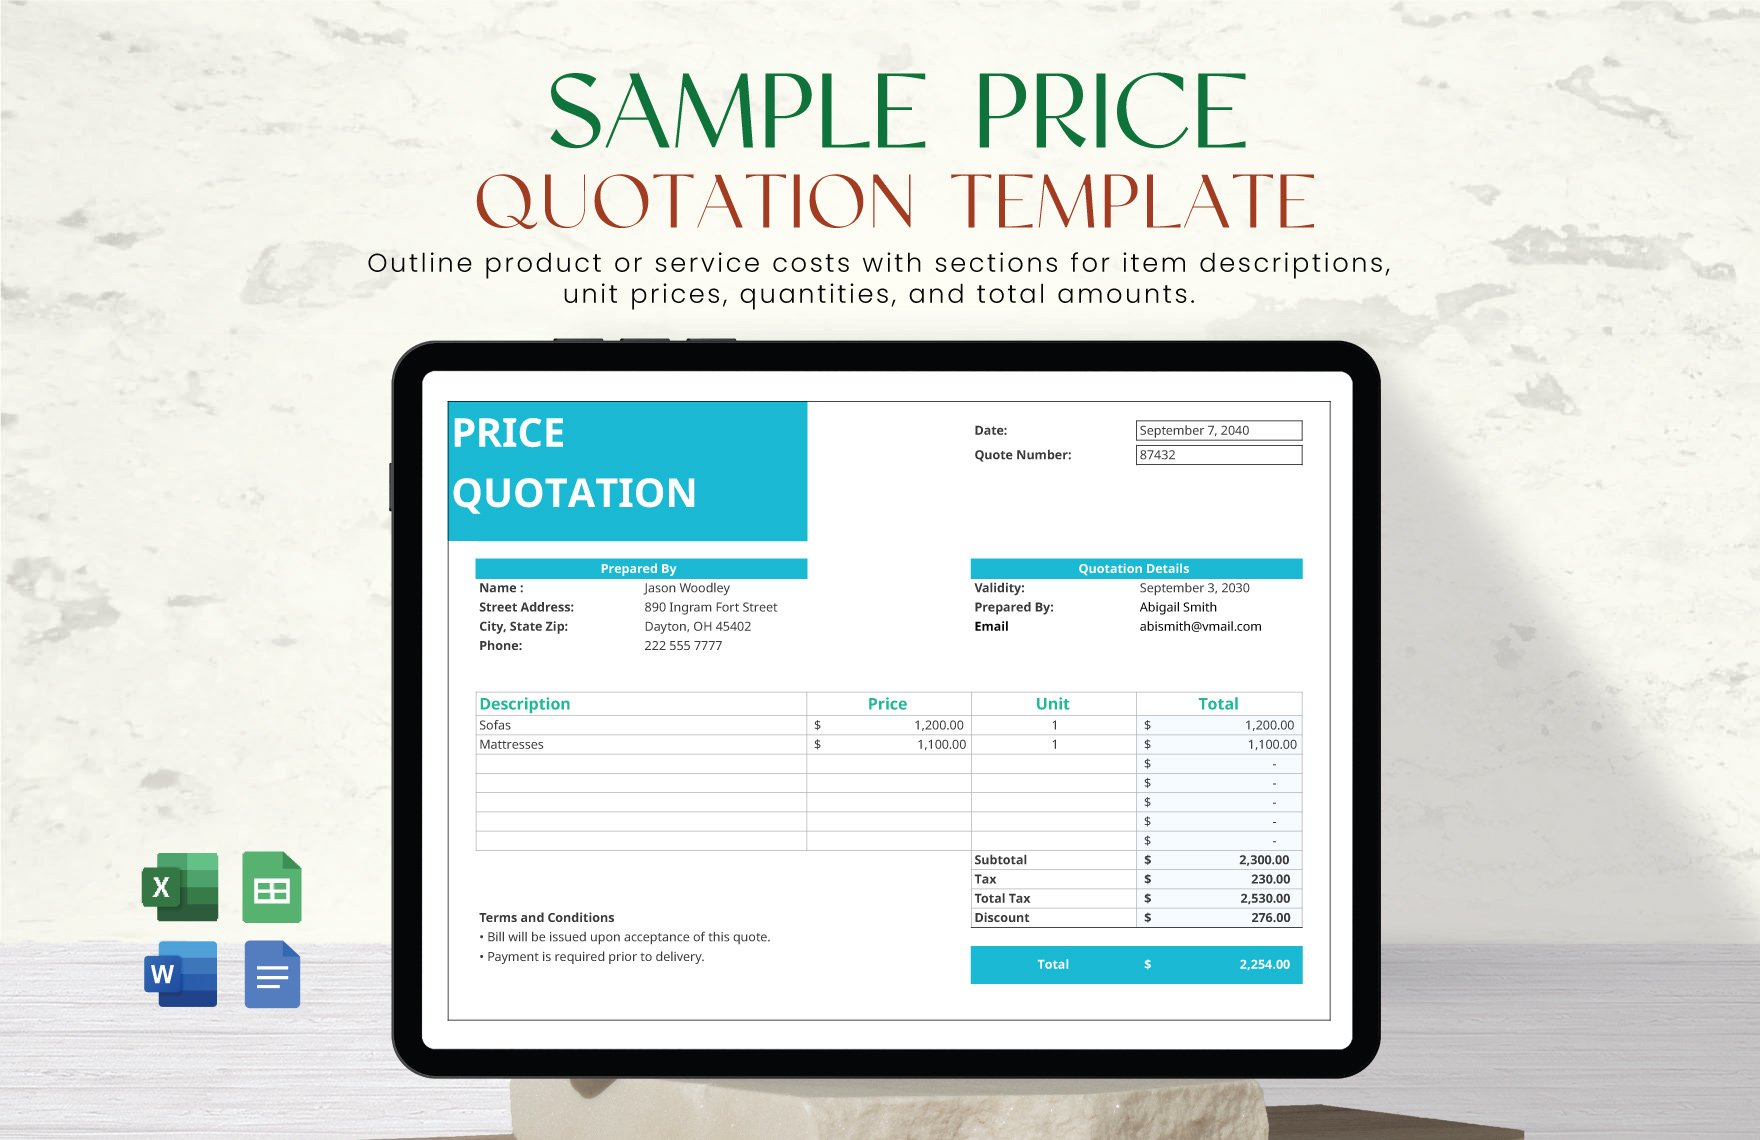 Free Sample Price Quotation Template in Word, Google Docs, Excel, Google Sheets